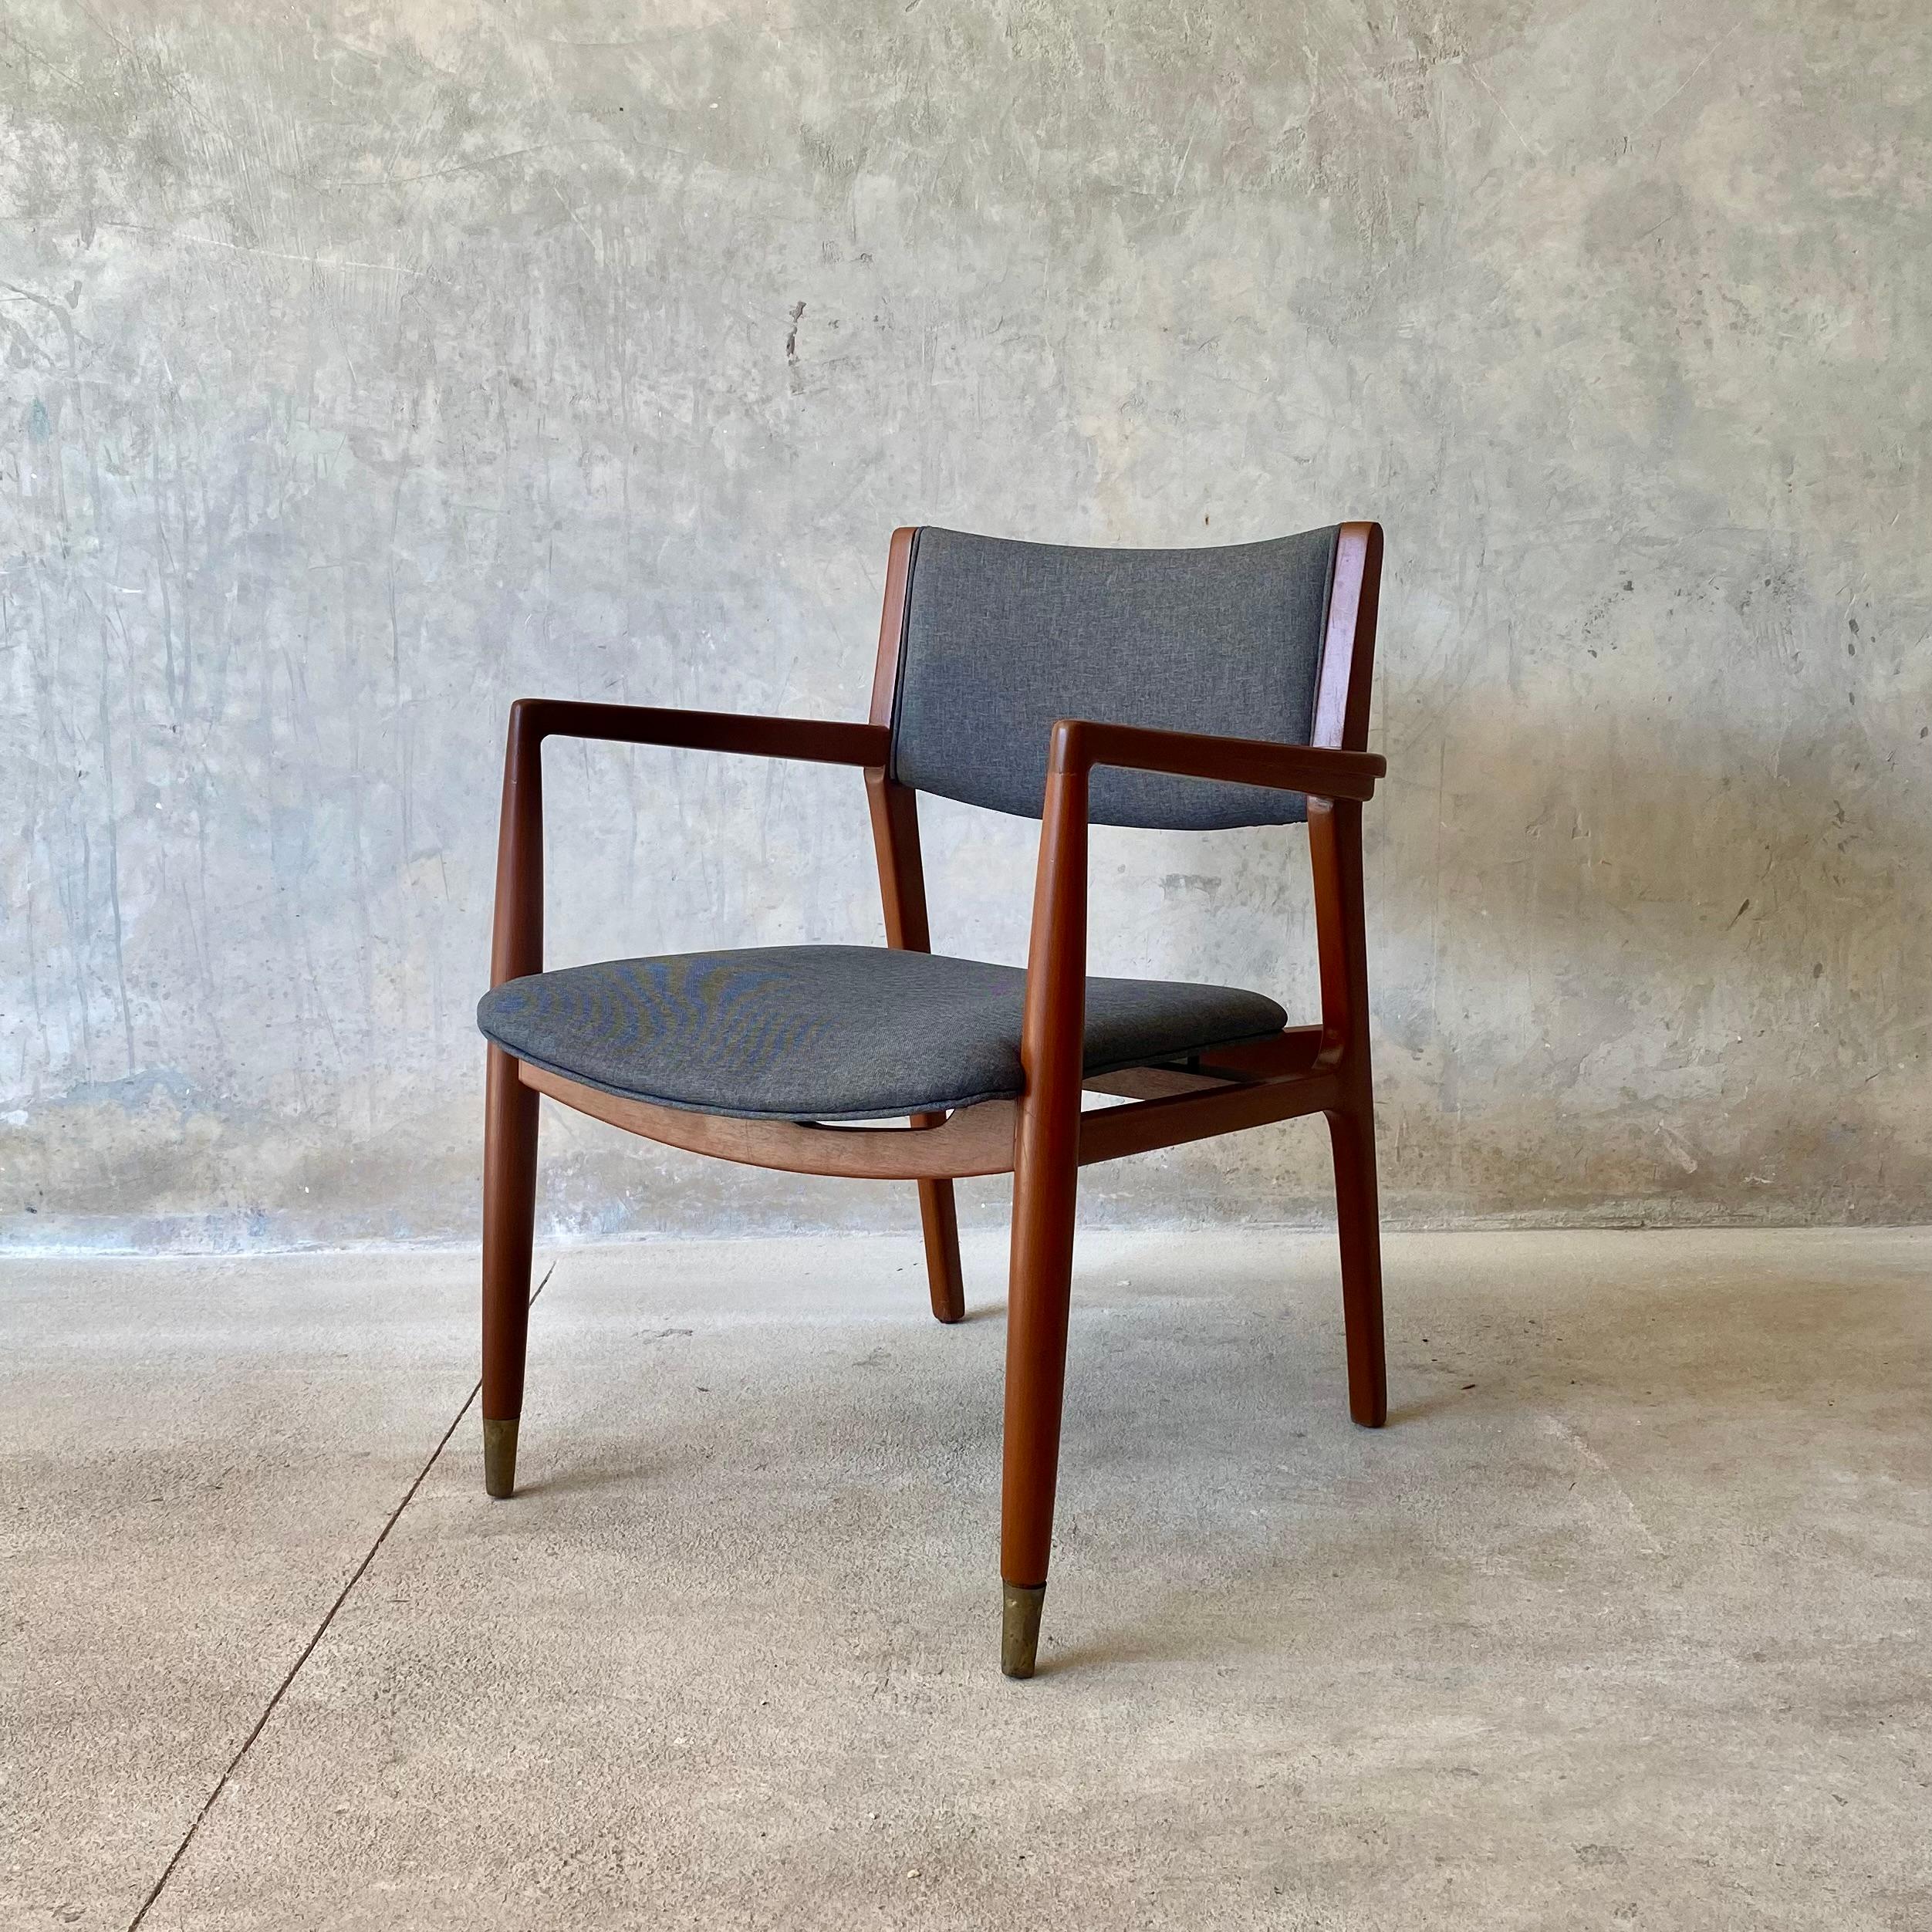 Occasional armchair, created by the Mexican architect Pedro Ramirez Vazquez around 1968, and manufactured in partnership with the IRGSA company. This duo of designer and manufacturer were creators of a large amount of furniture used for the 1968